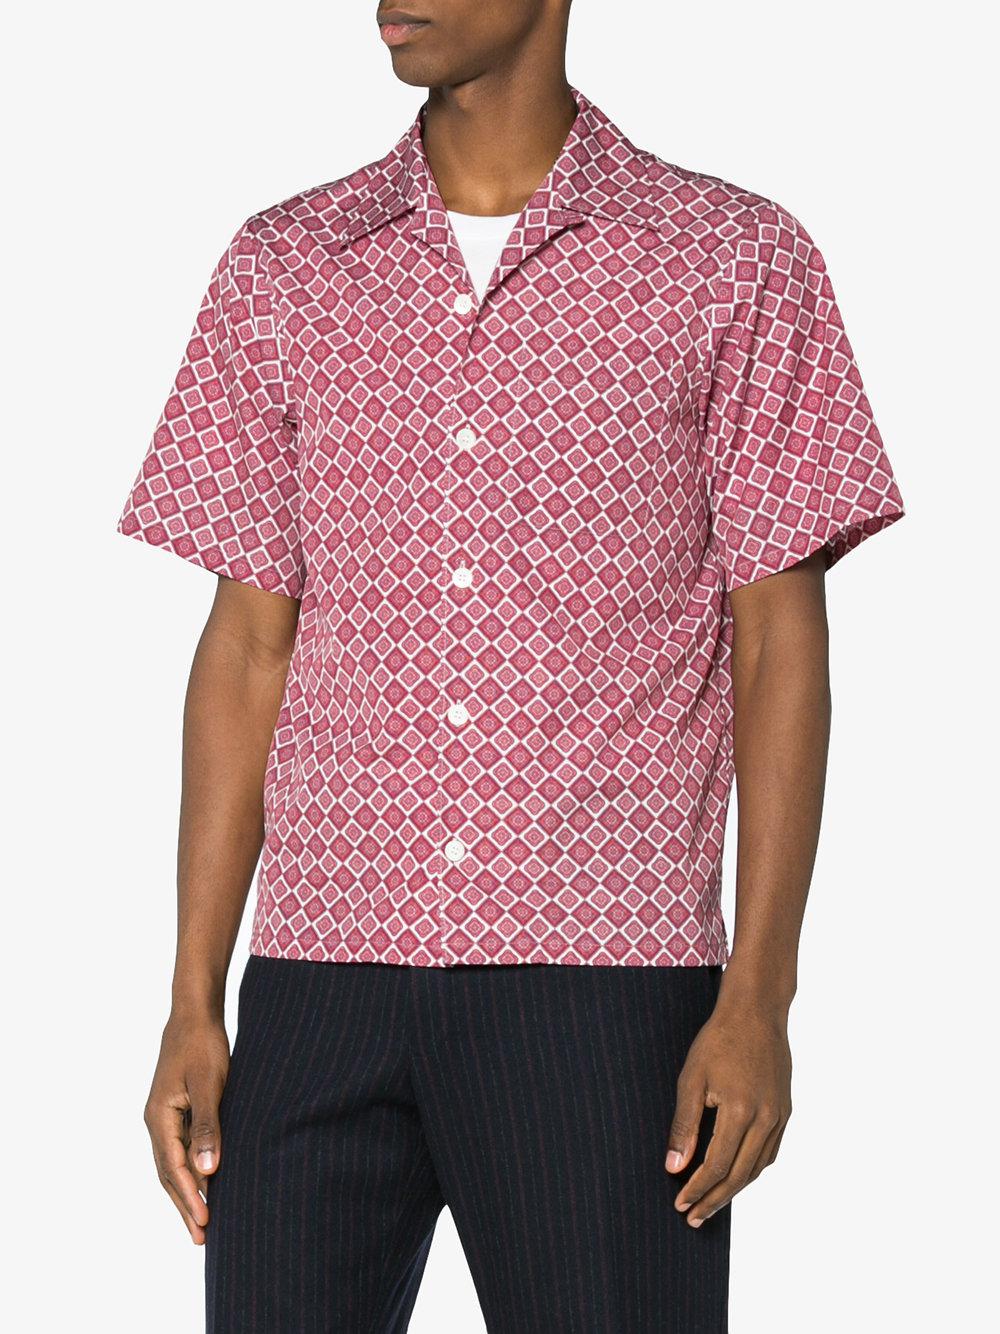 Prada Cotton Patterned Bowling Shirt in Pink & Purple (Pink) for Men - Lyst